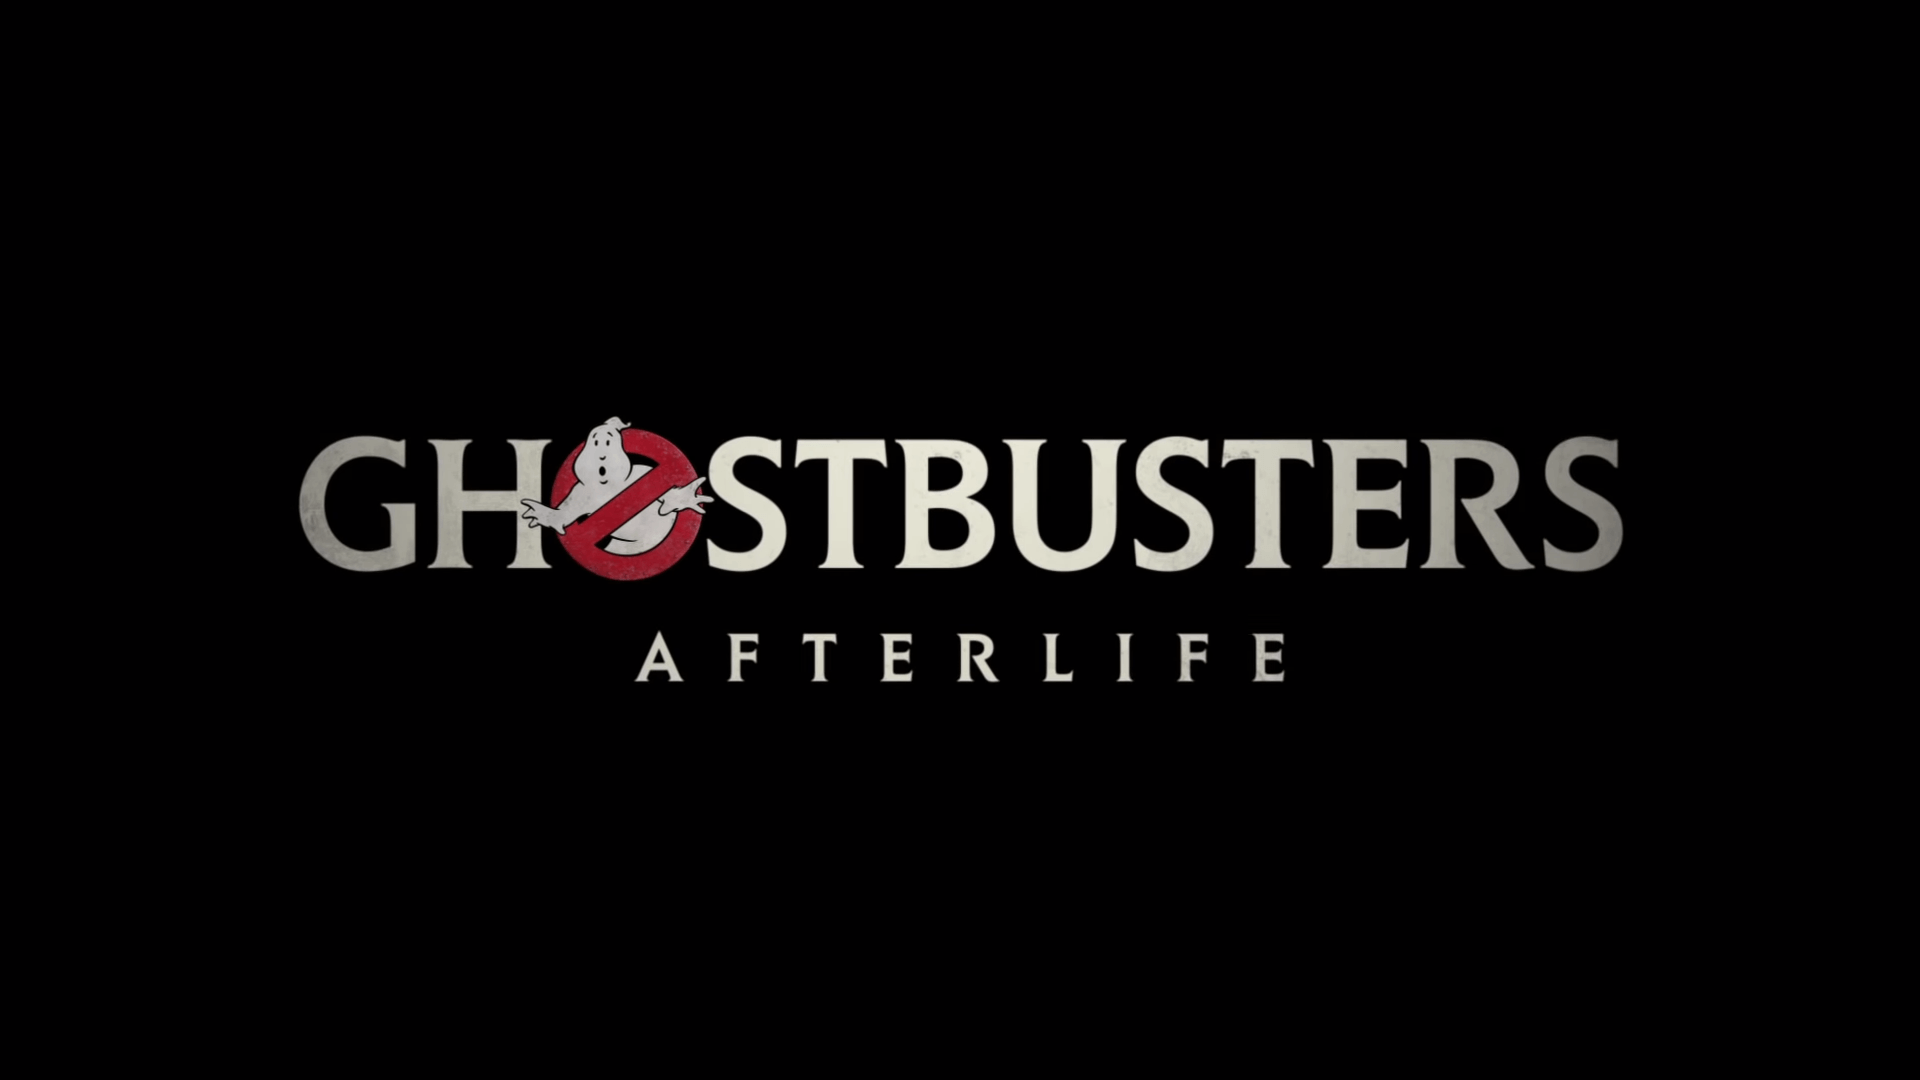 Hd Poster Of Ghostbusters Afterlife Wallpapers